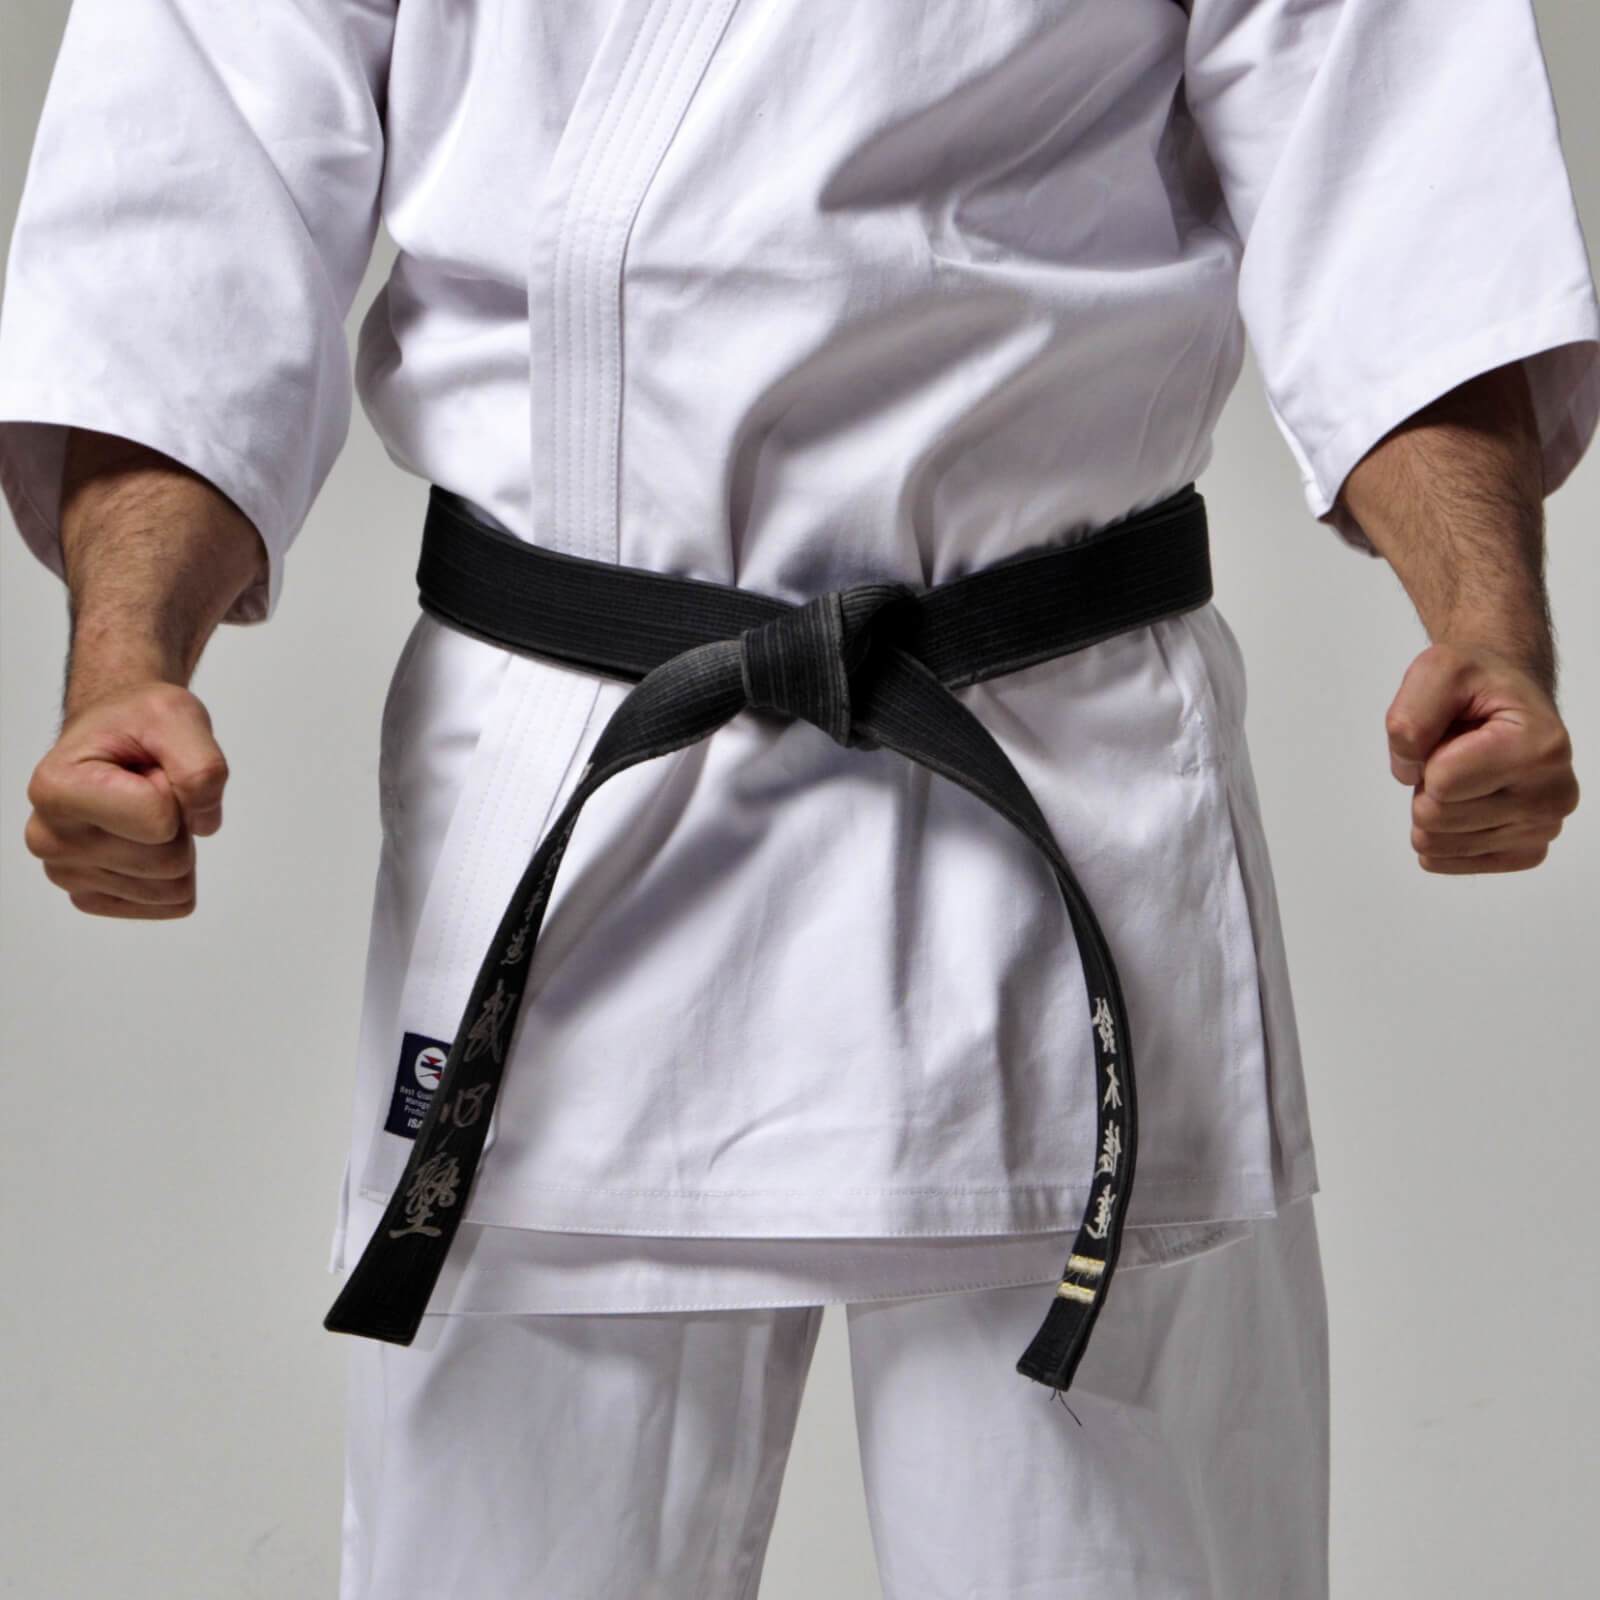 The Best Isami Karate Black Belt with Embroidery